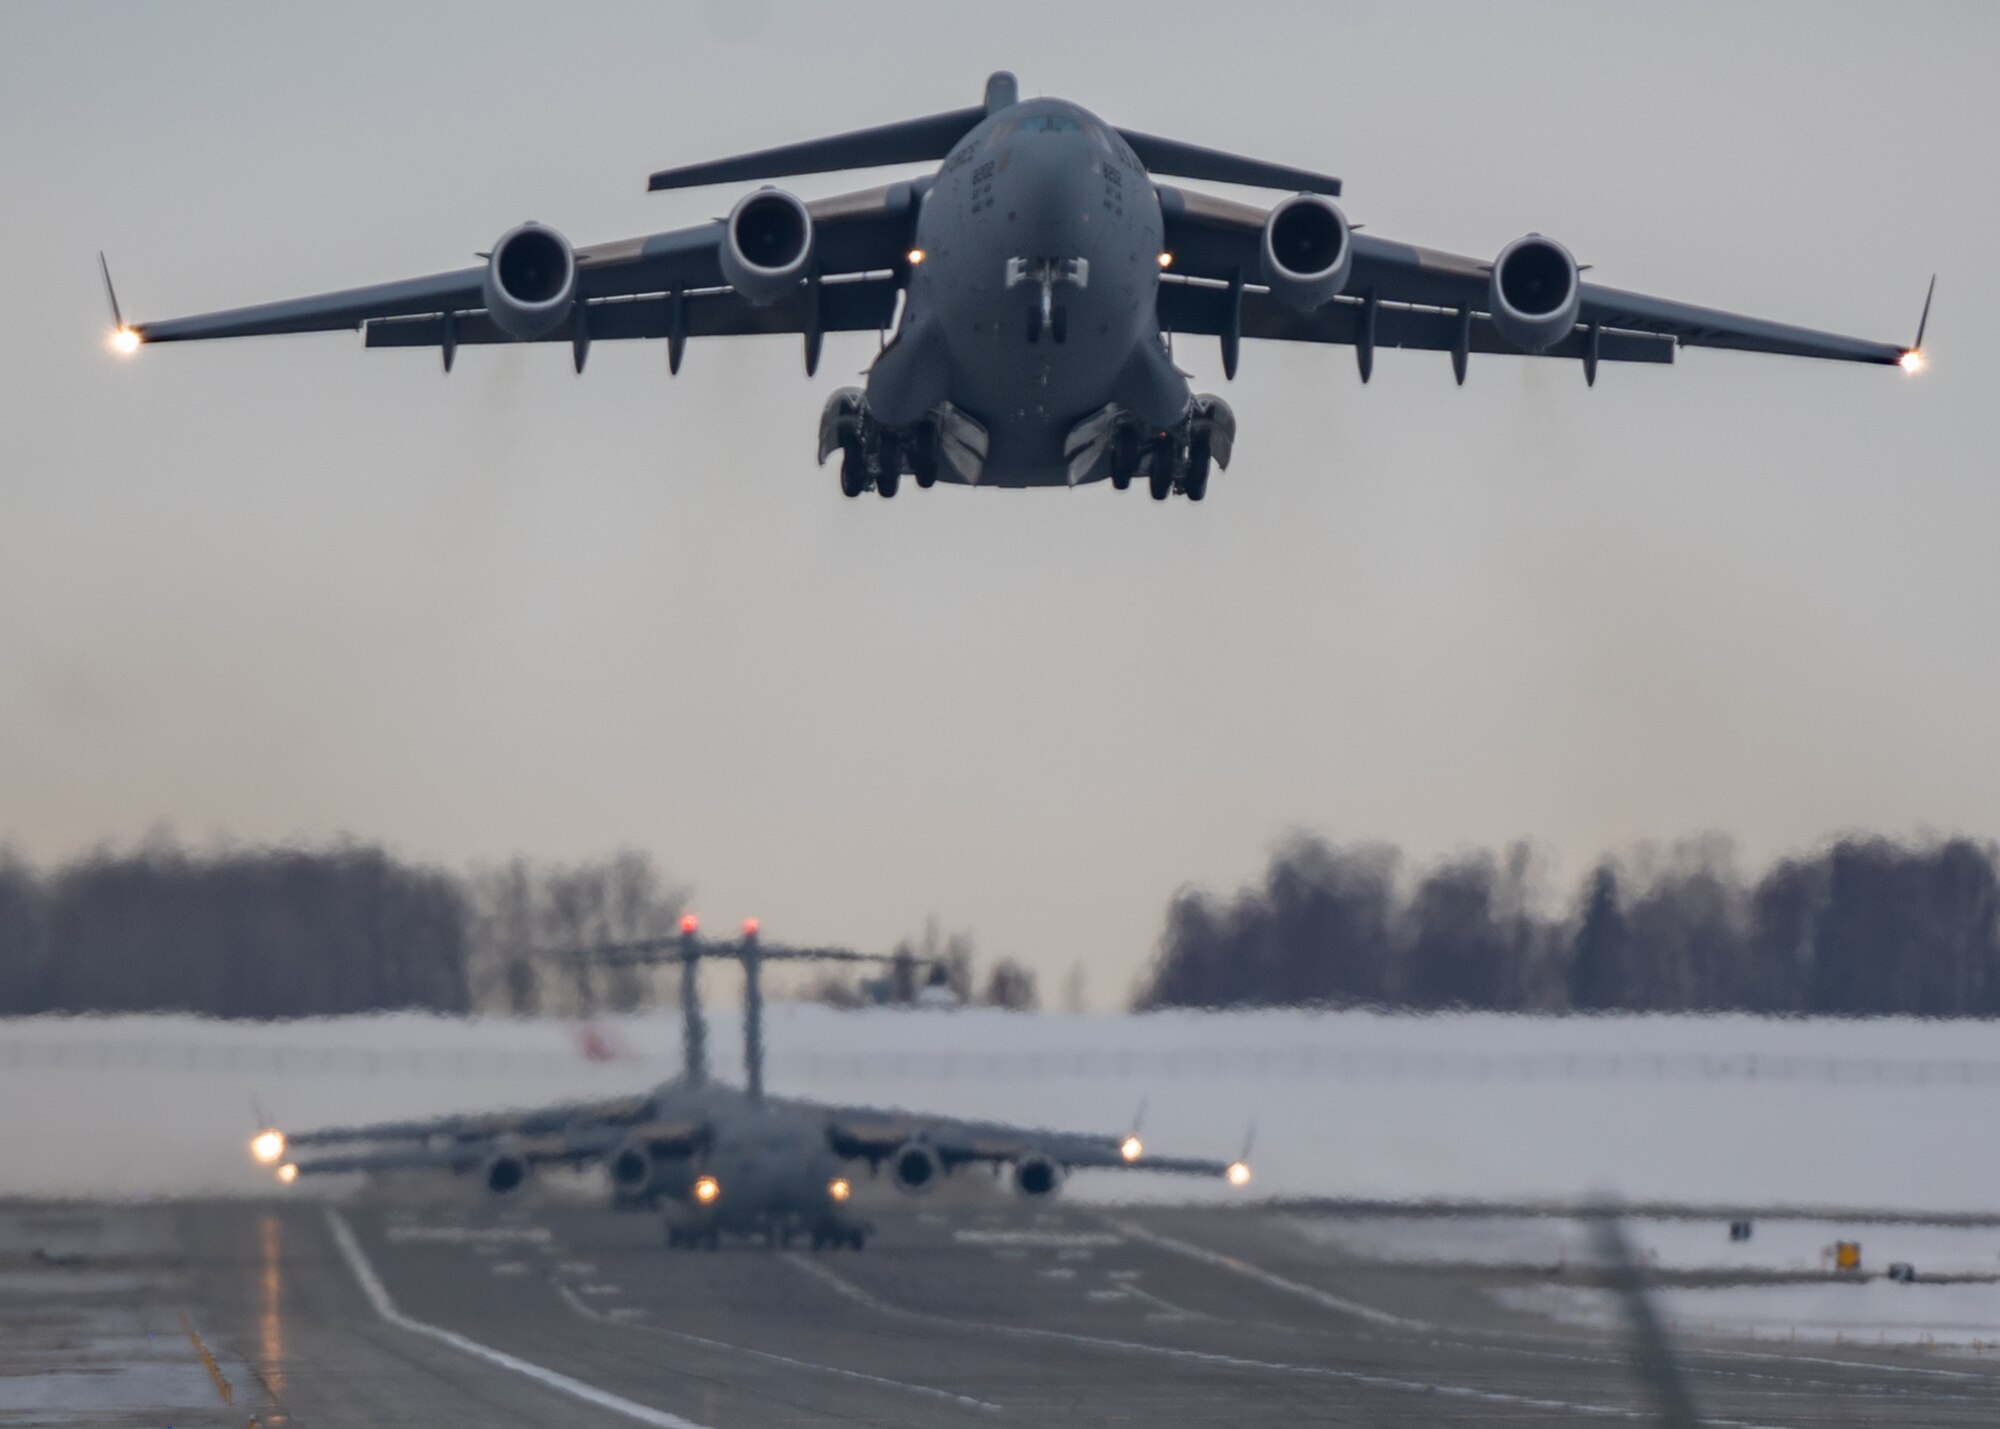 A C-17 Globemaster III assigned to Joint Base Lewis-McChord, Washington, takes off from a runway during Exercise Rainer War 22-A at Joint Base Elmendorf-Richardson, Alaska, March 18, 2022. The exercise is designed to demonstrate the wing’s ability to operate and survive while defeating challenges to the U.S. military advantage in all operating domains – air, land, sea and cyberspace. (U.S. Air Force photo by Airman 1st Class Charles Casner)